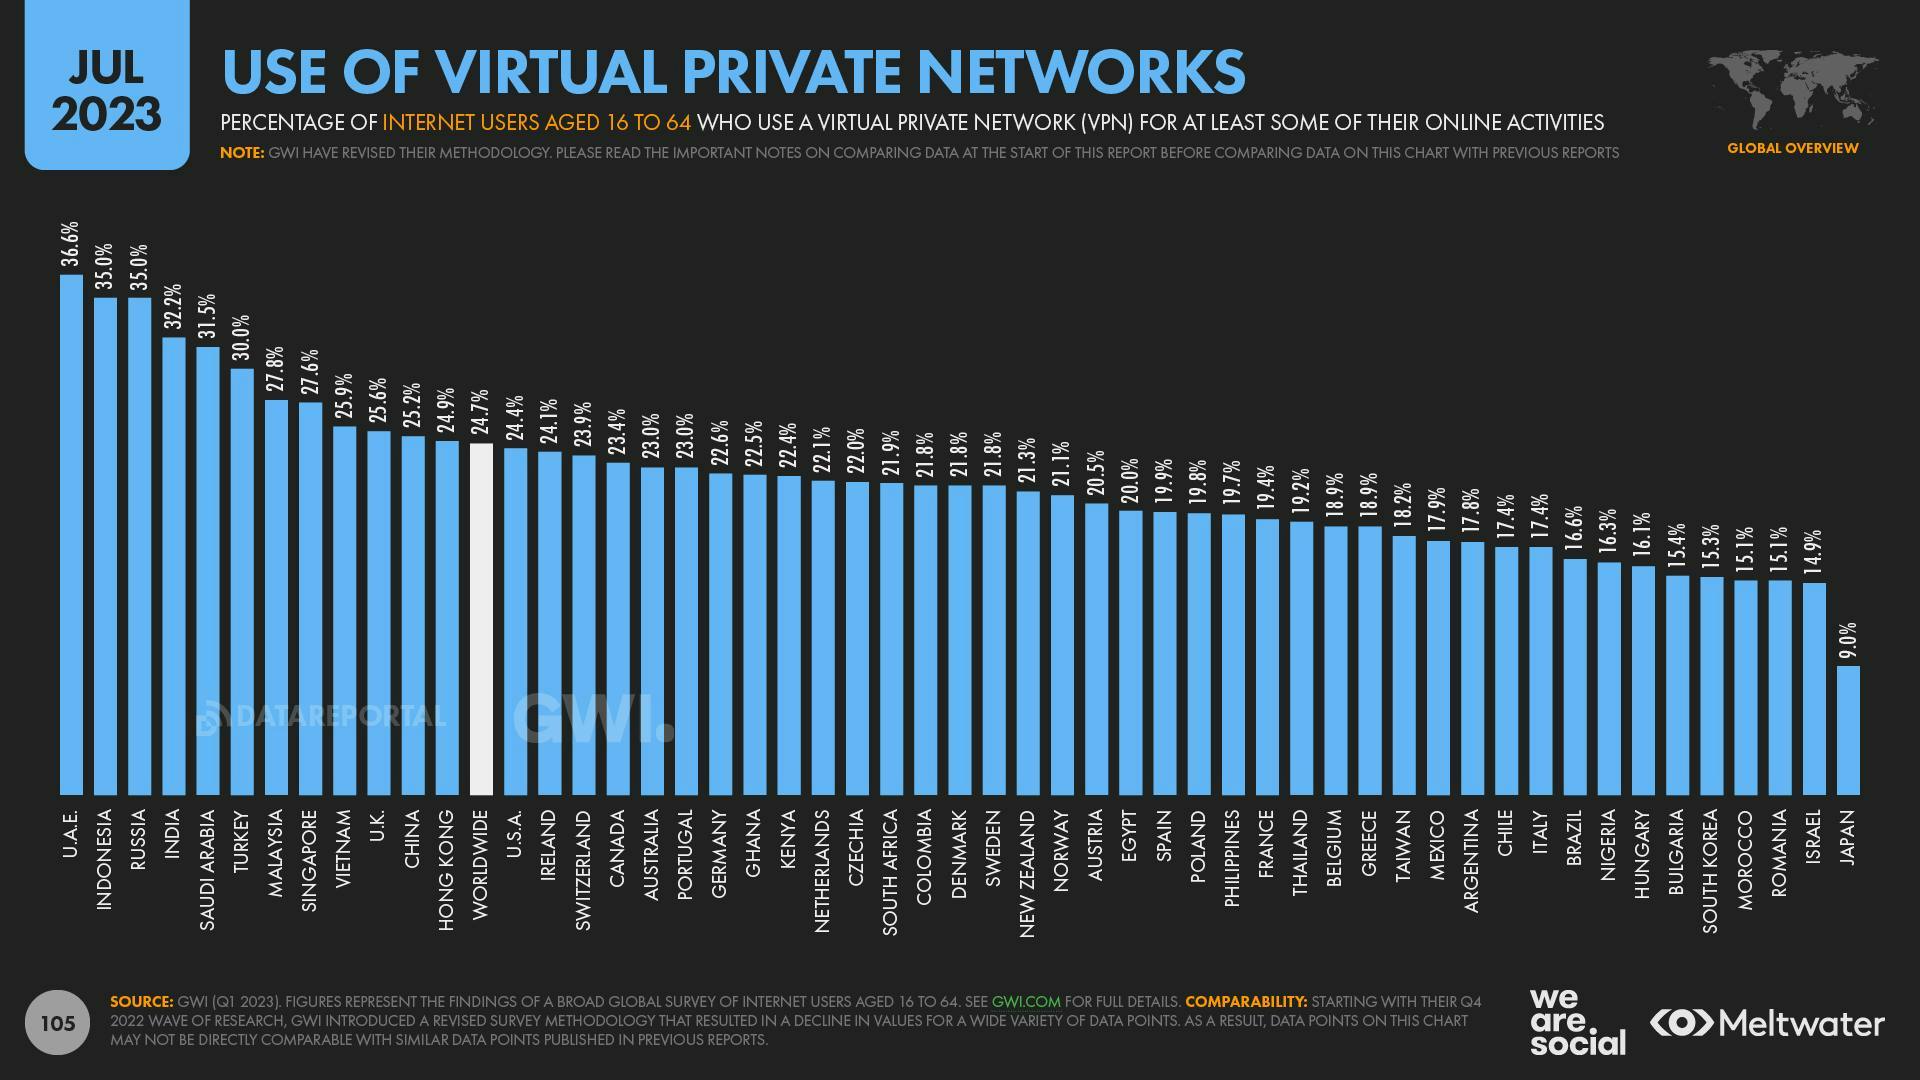 Use of virtual private networks by country